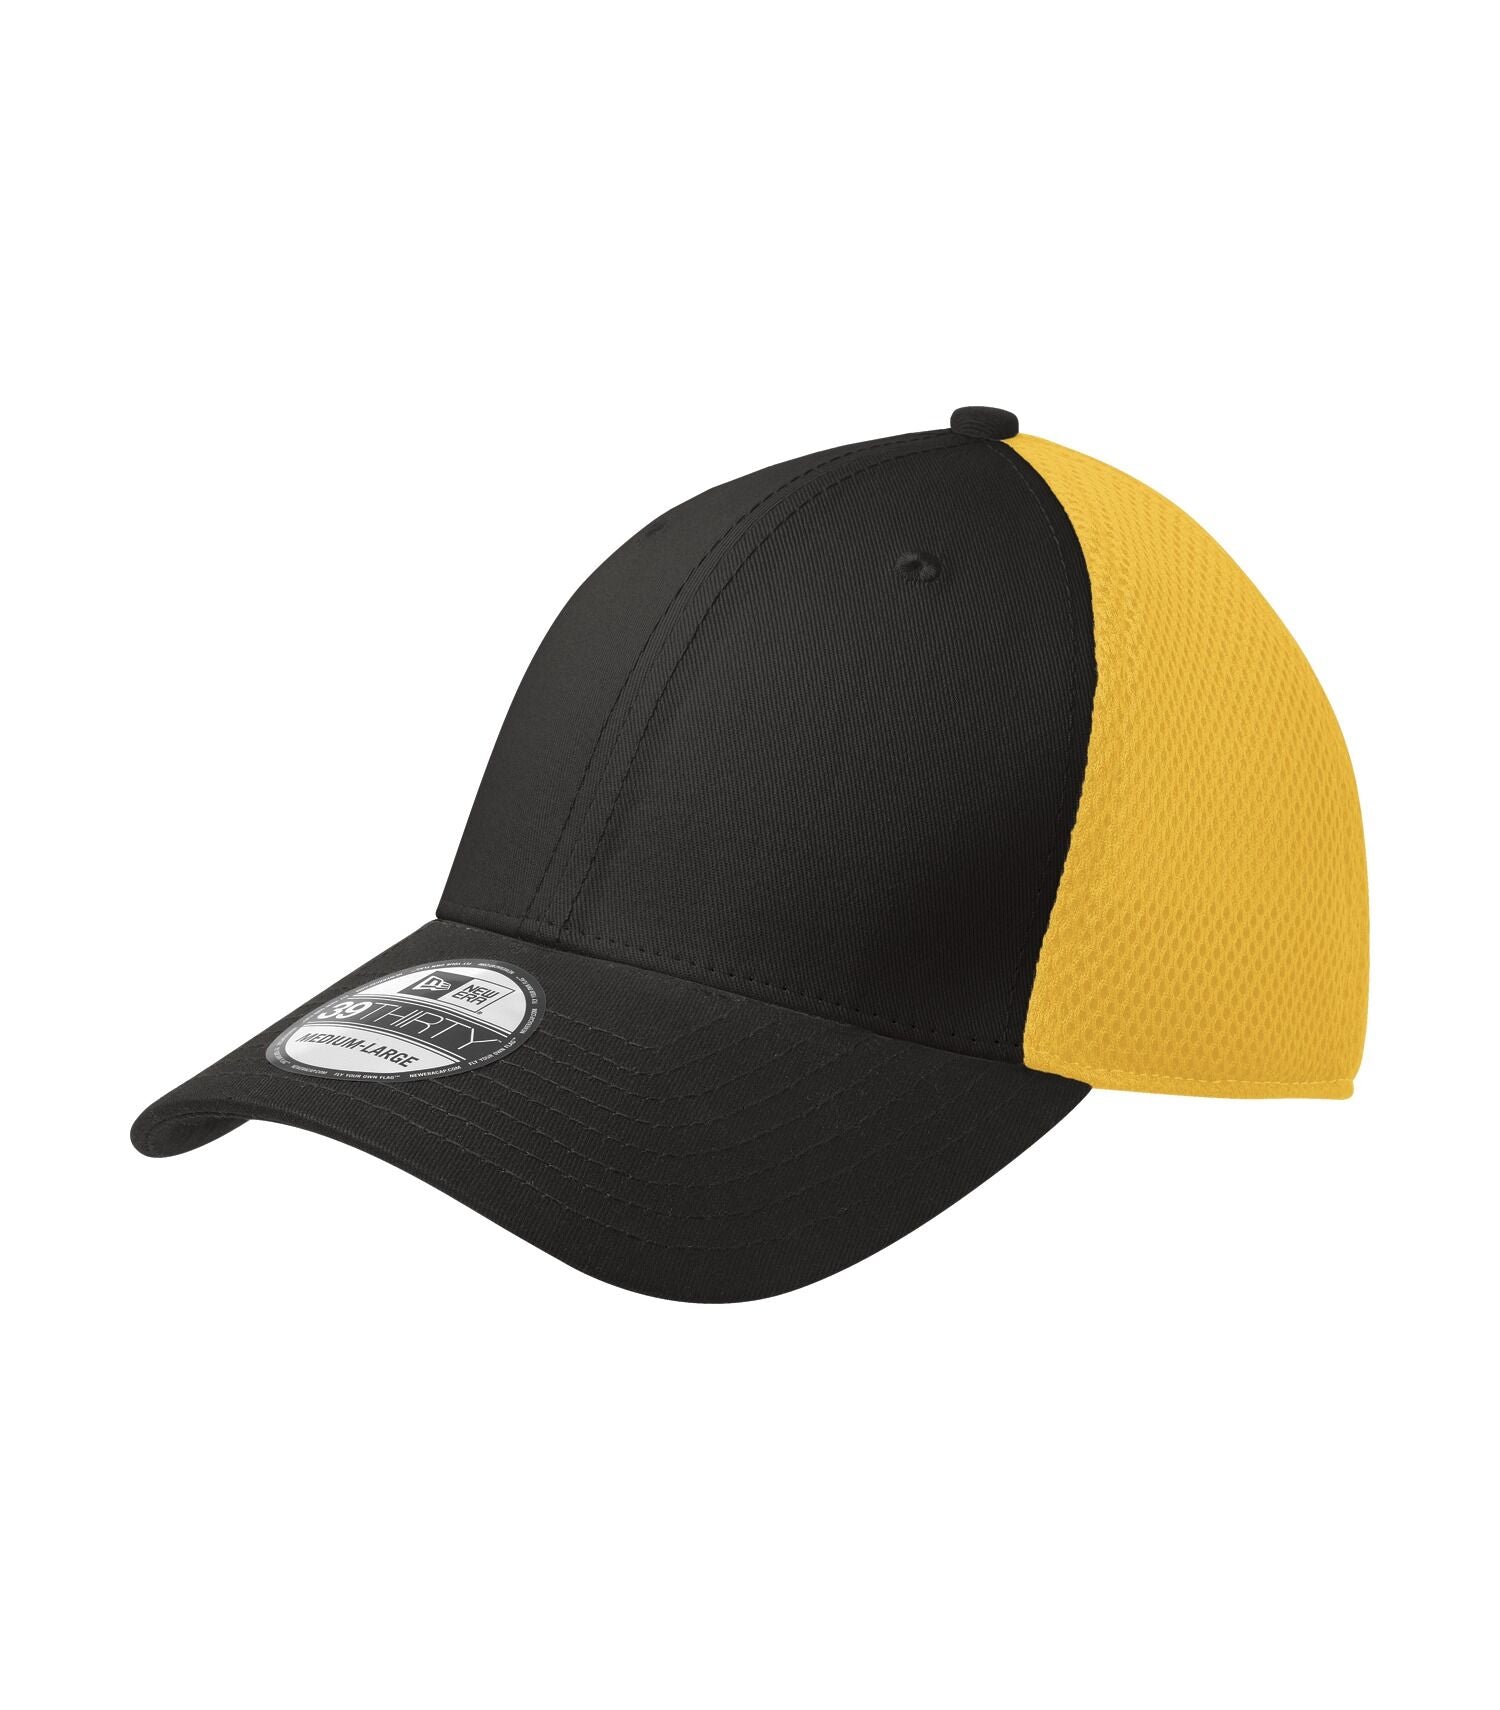 Eletina Men's Swag HAT in Black Cap, Reflective Gold, One Size at   Men’s Clothing store